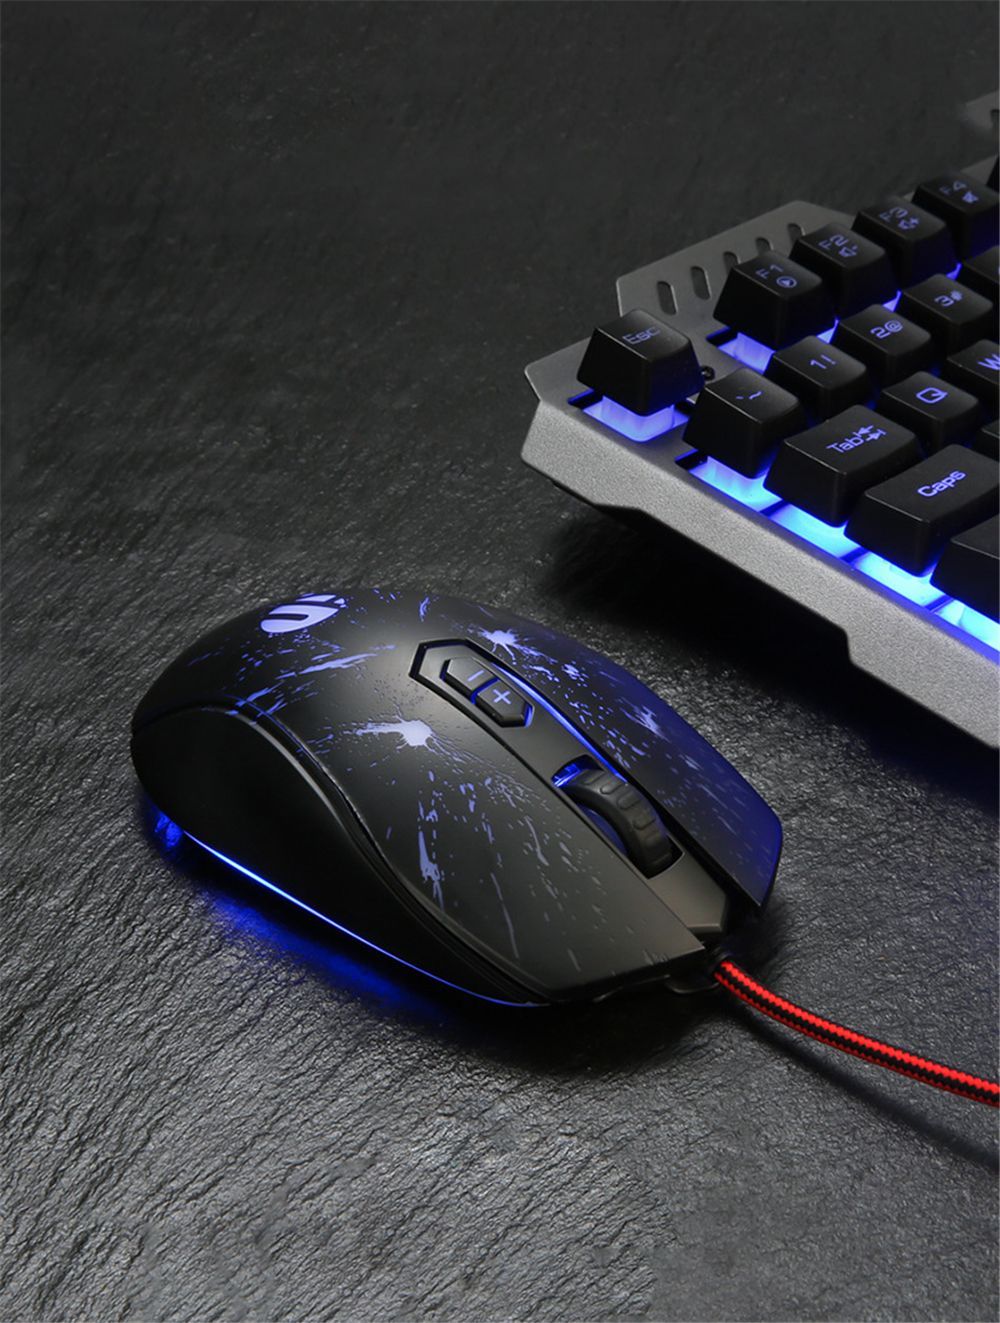 INPHIC-W66-Wired-Mechanical-Gaming-Mouse-4800-DPI-Silent-Mouse-For-Pro-Gamers-Business-Office-1735870